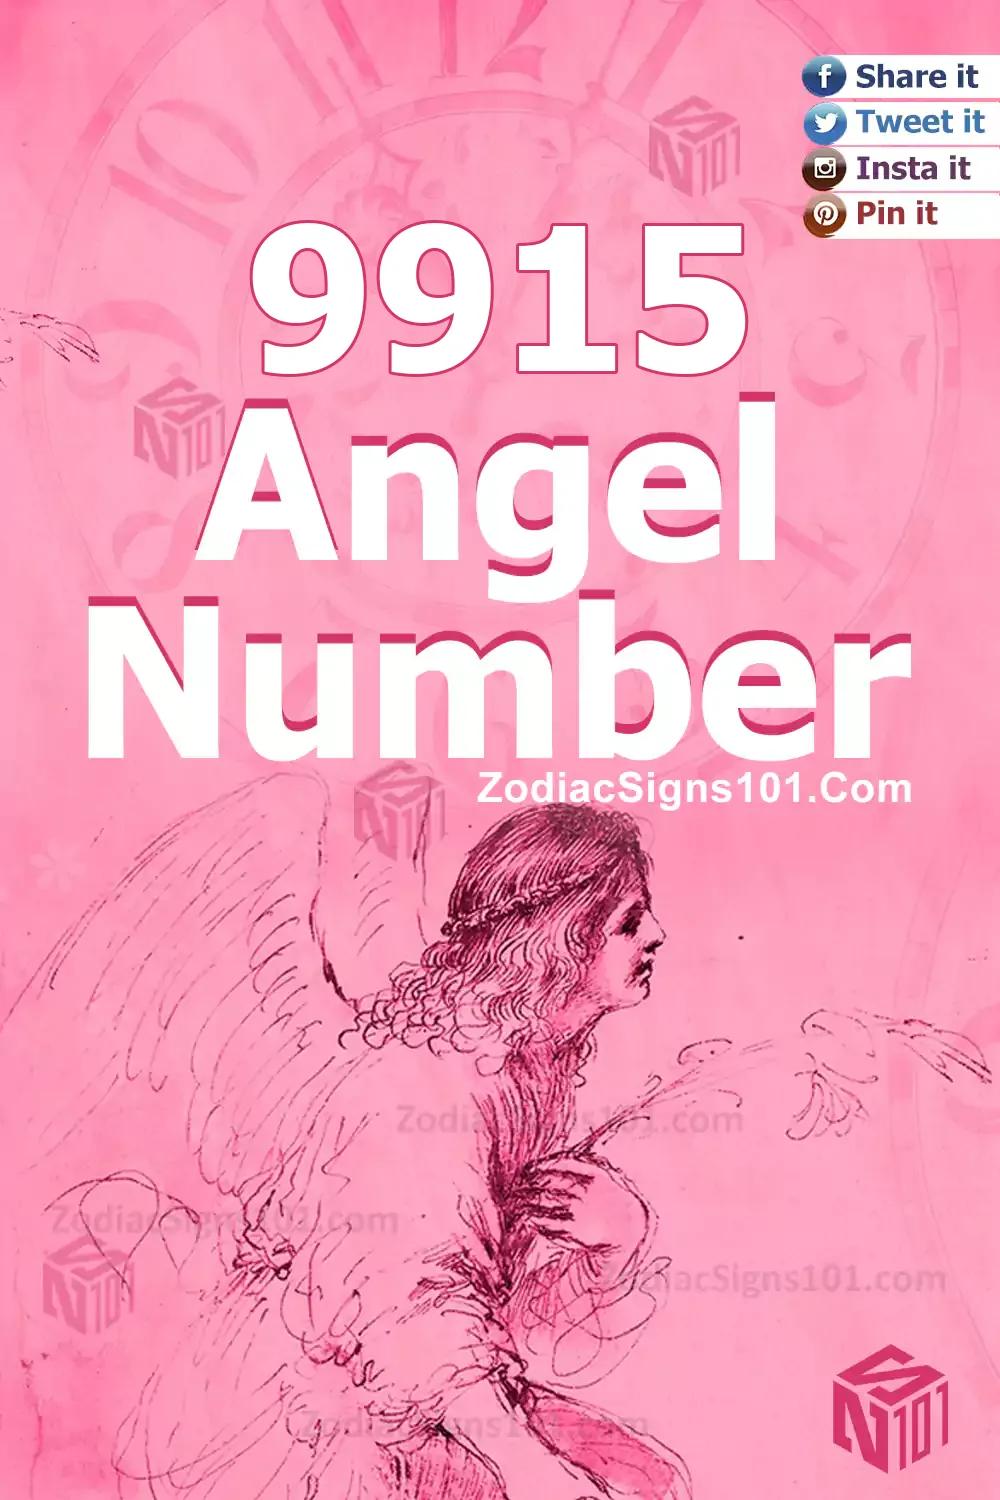 9915 Angel Number Meaning